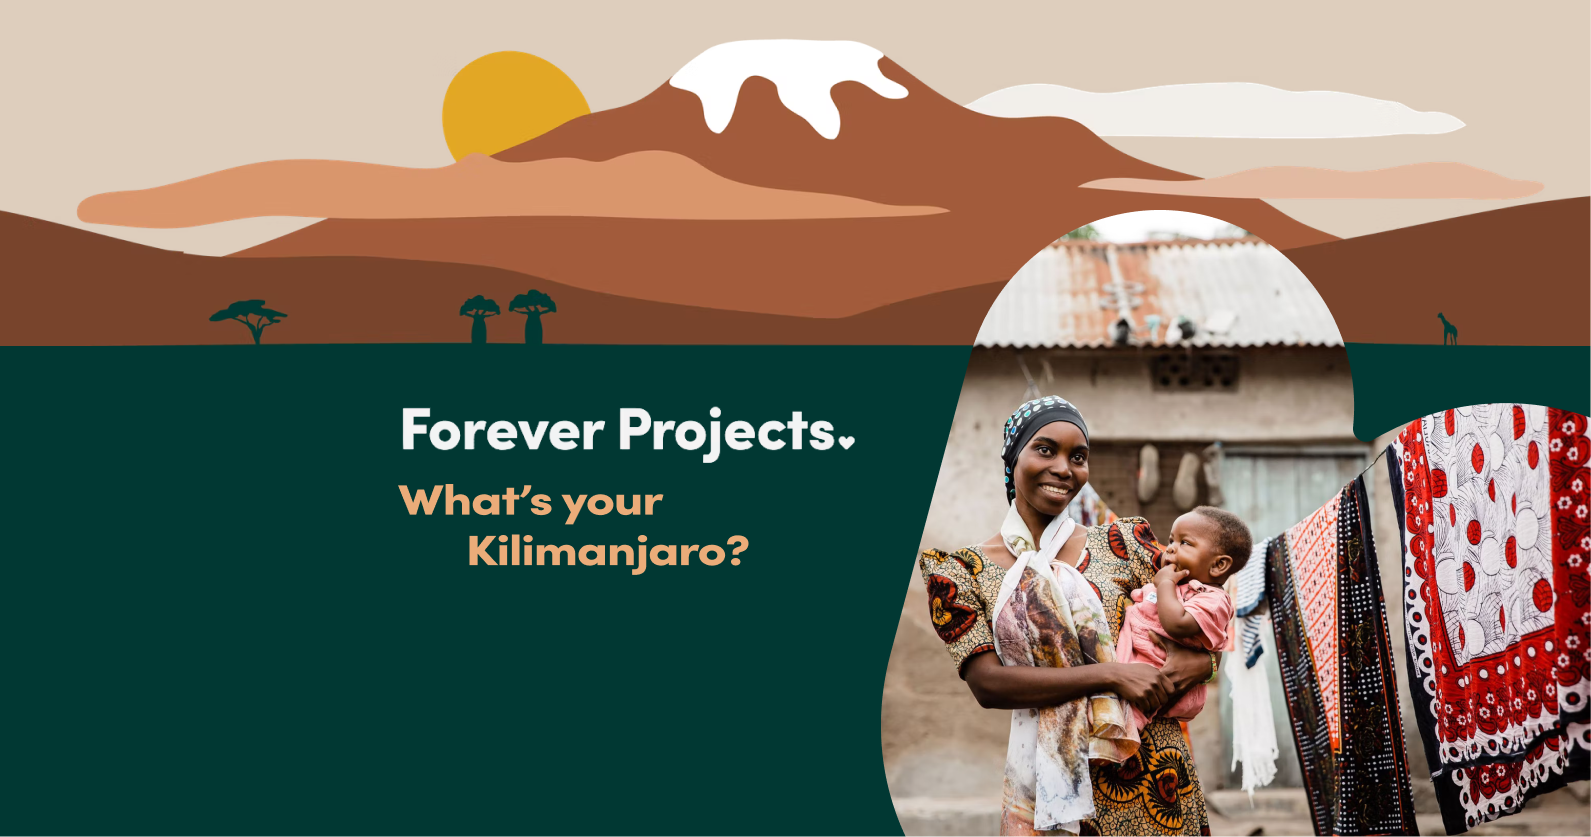 Charity campaign, "What's your Kilimanjaro?" by Forever Projects, with a picture of an adult holding a child in Tanzania.